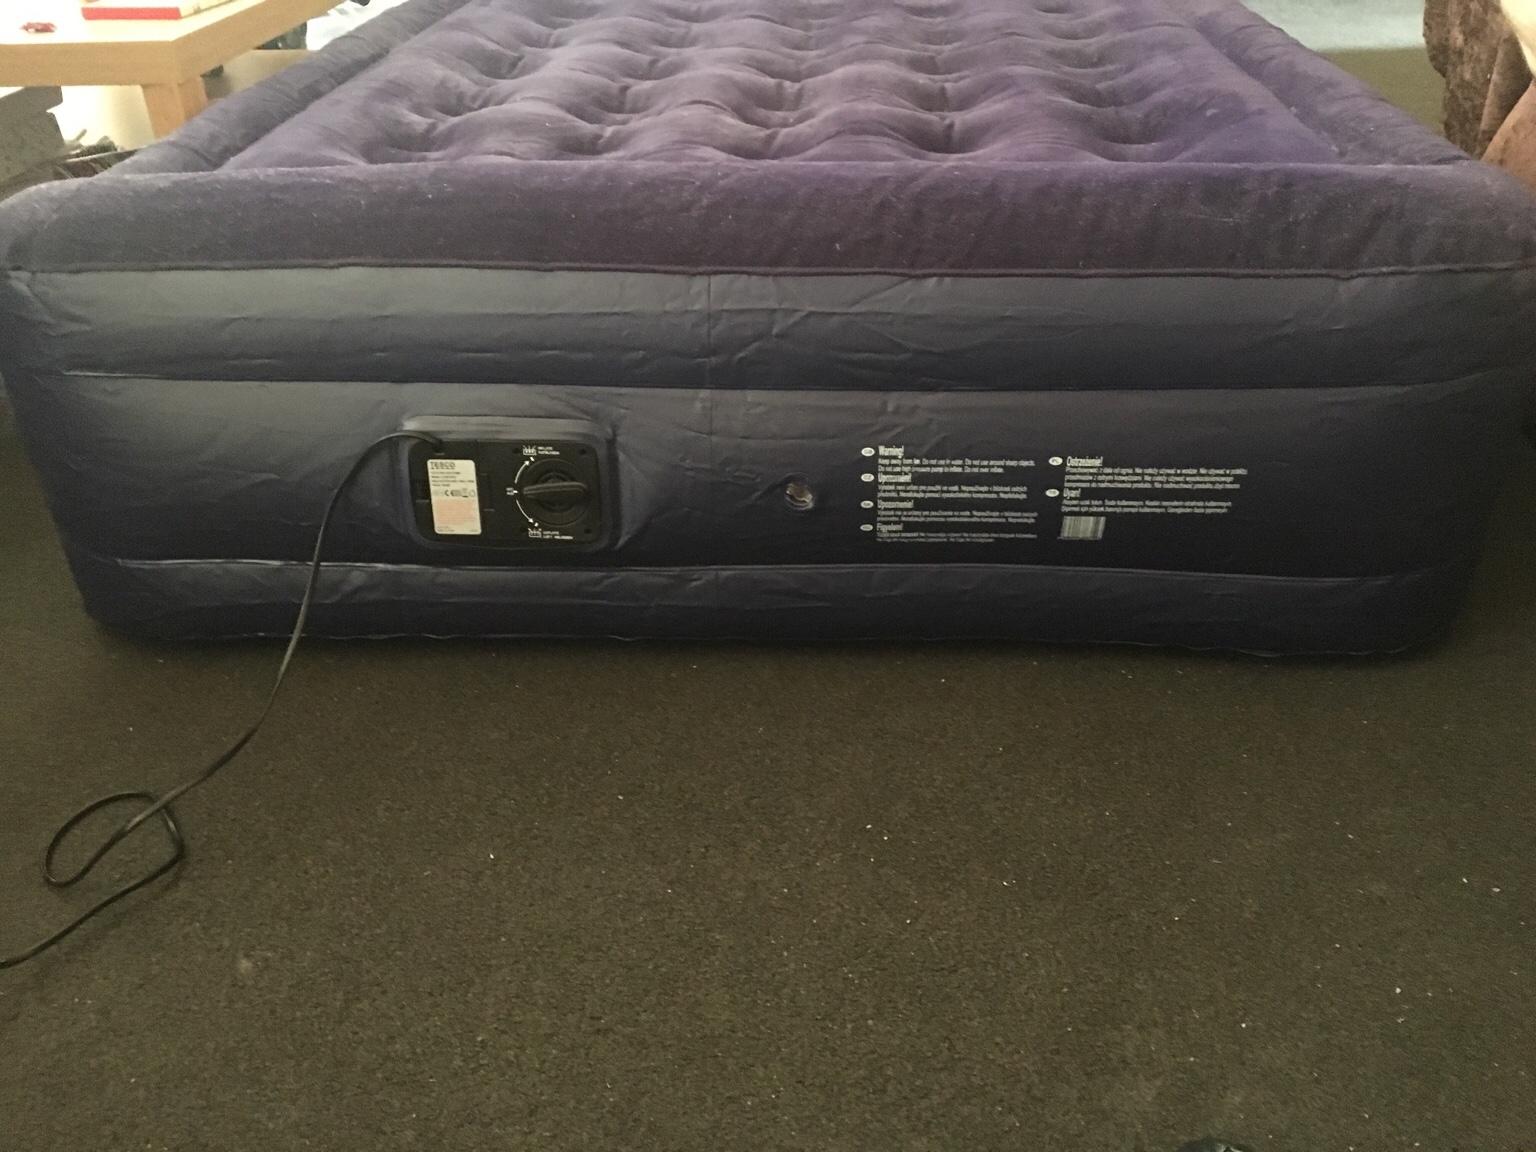 Tesco Inflatable Double Bed In, Intex Pull Out Sofa Tesco